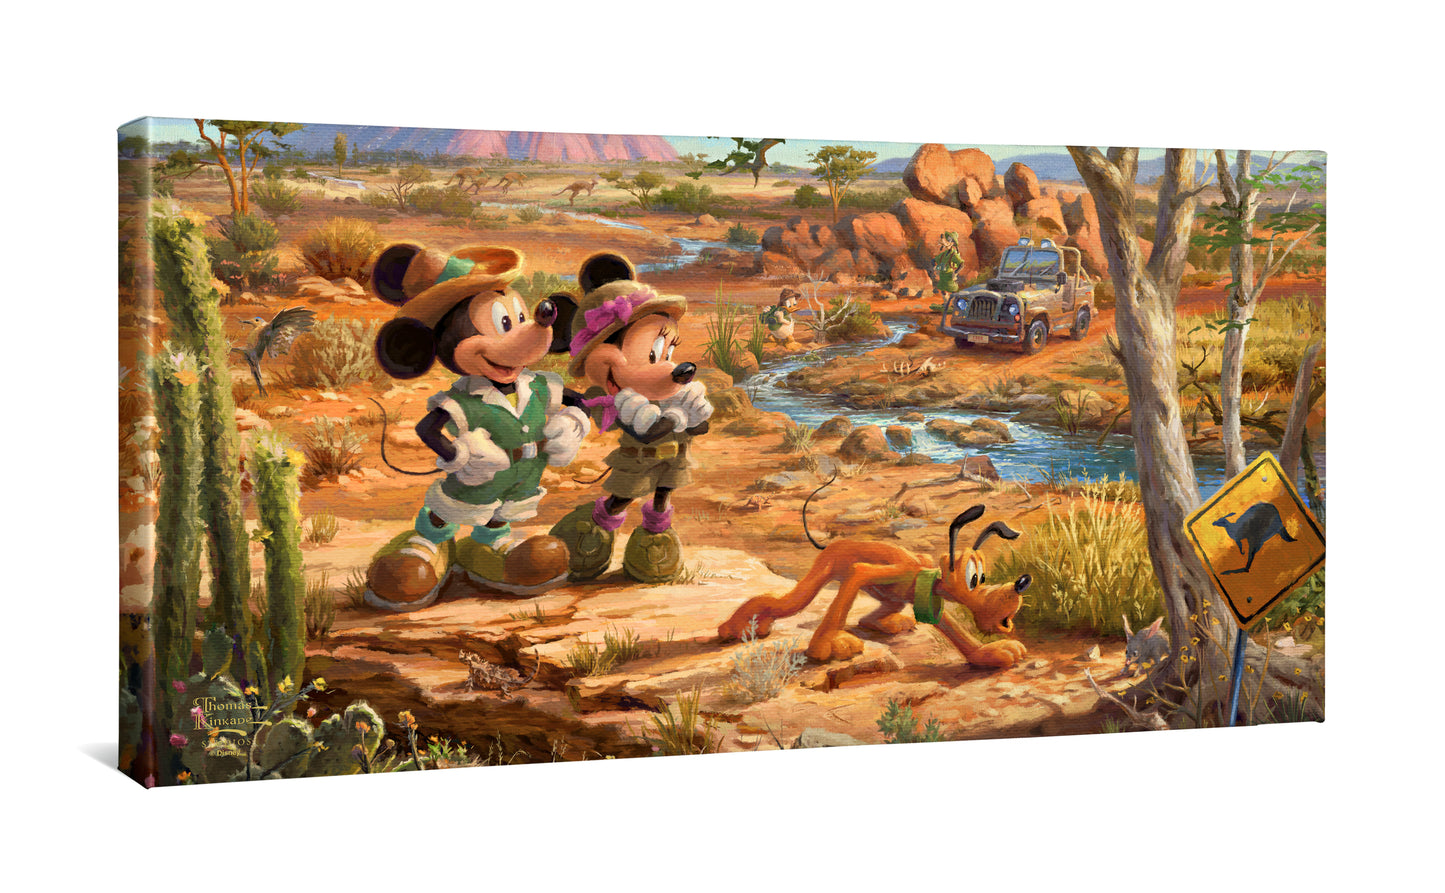 161687_CGW M&M In The Outback 16X31 Gallery Wrap Canvas_Mocked.jpg